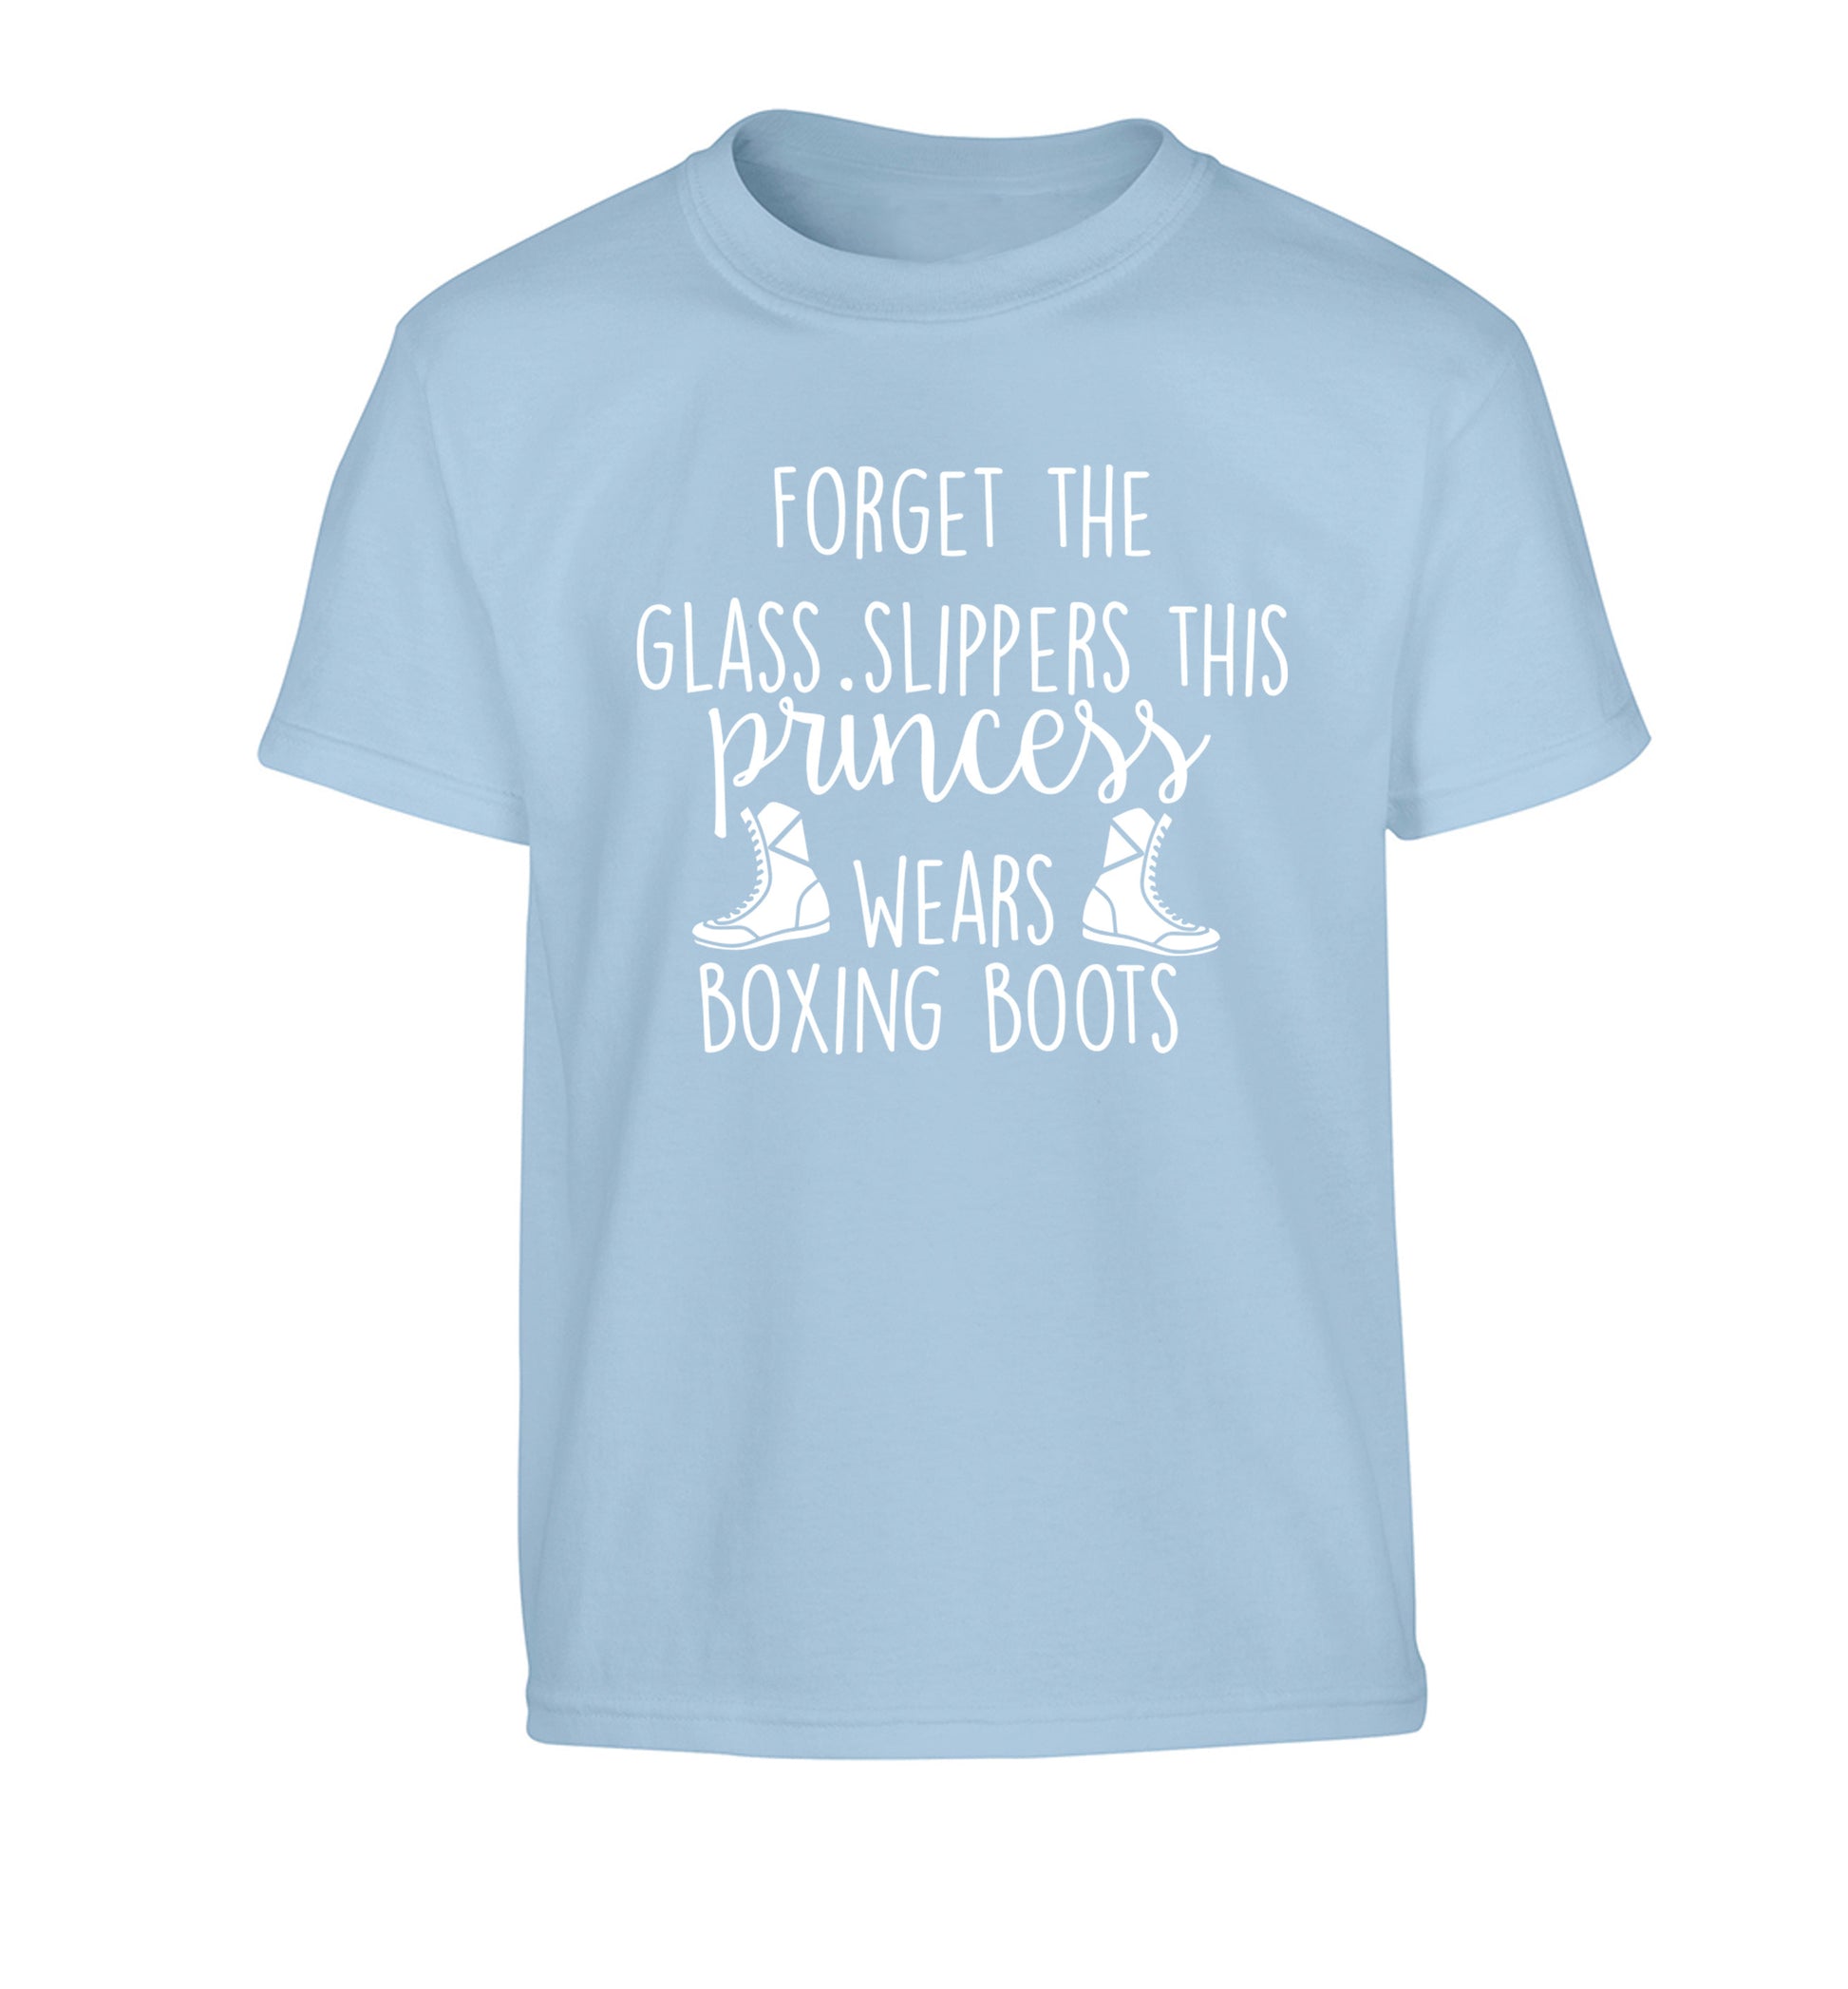 Forget the glass slippers this princess wears boxing boots Children's light blue Tshirt 12-14 Years